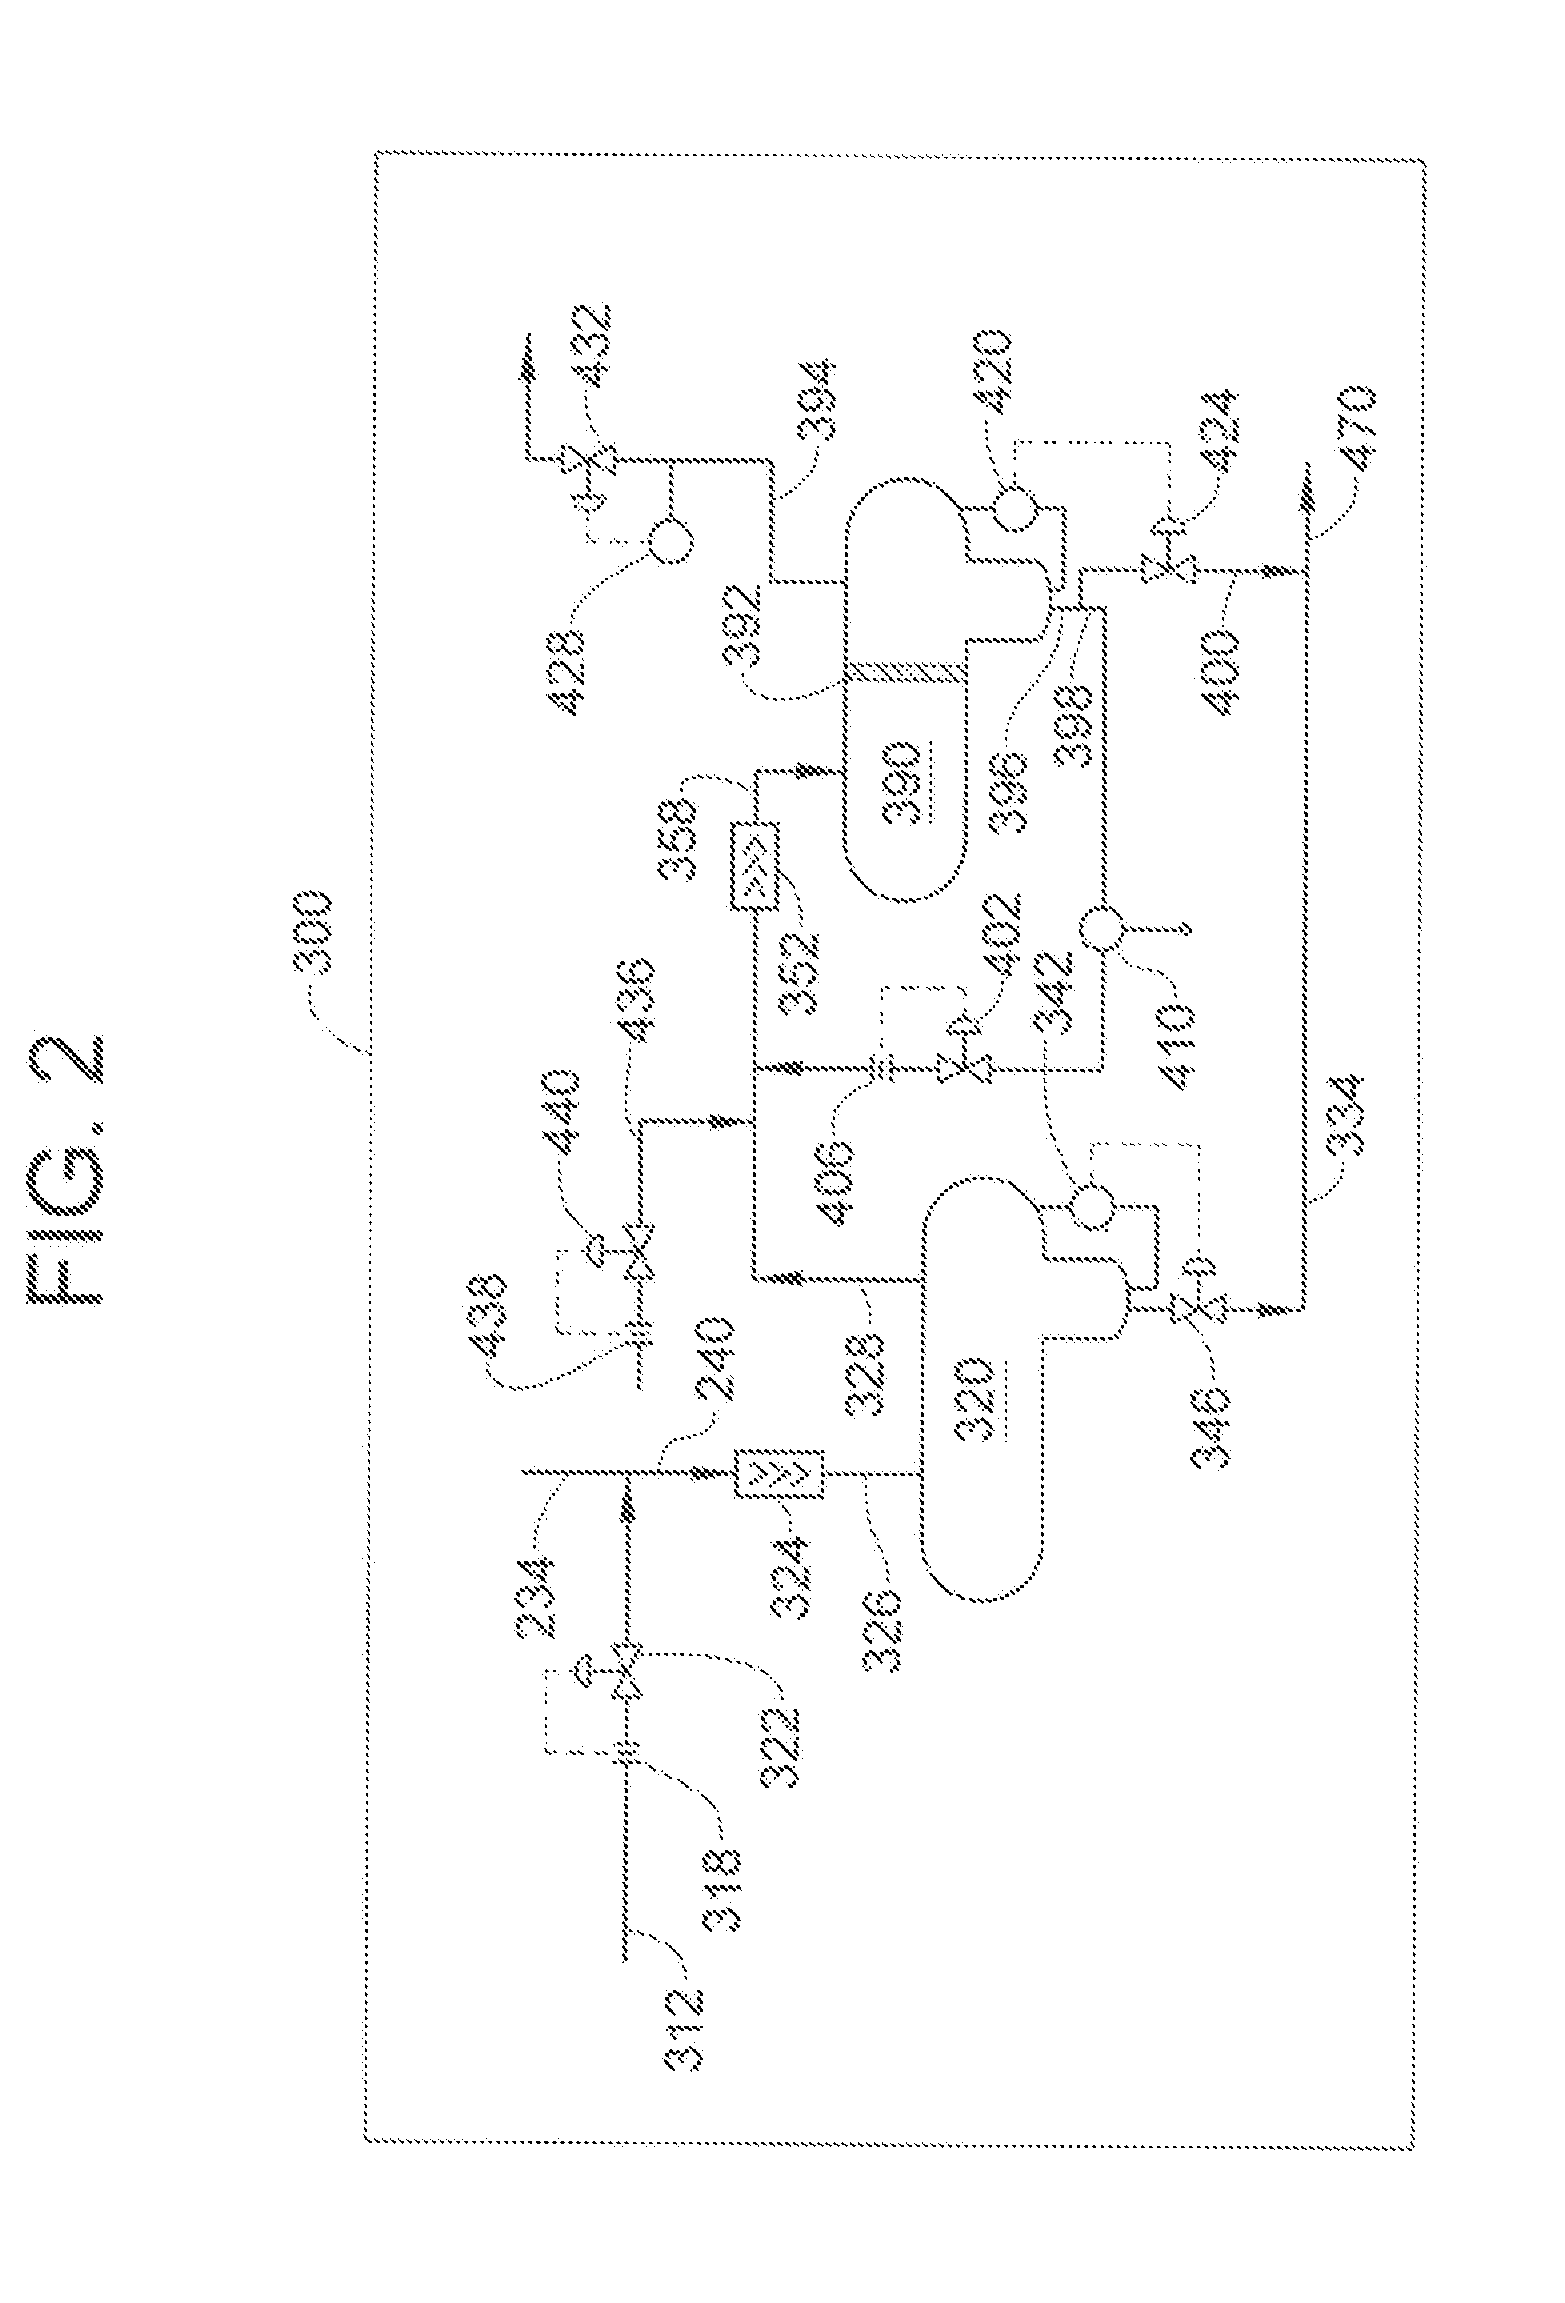 Process and apparatus for removing hydrogen sulfide